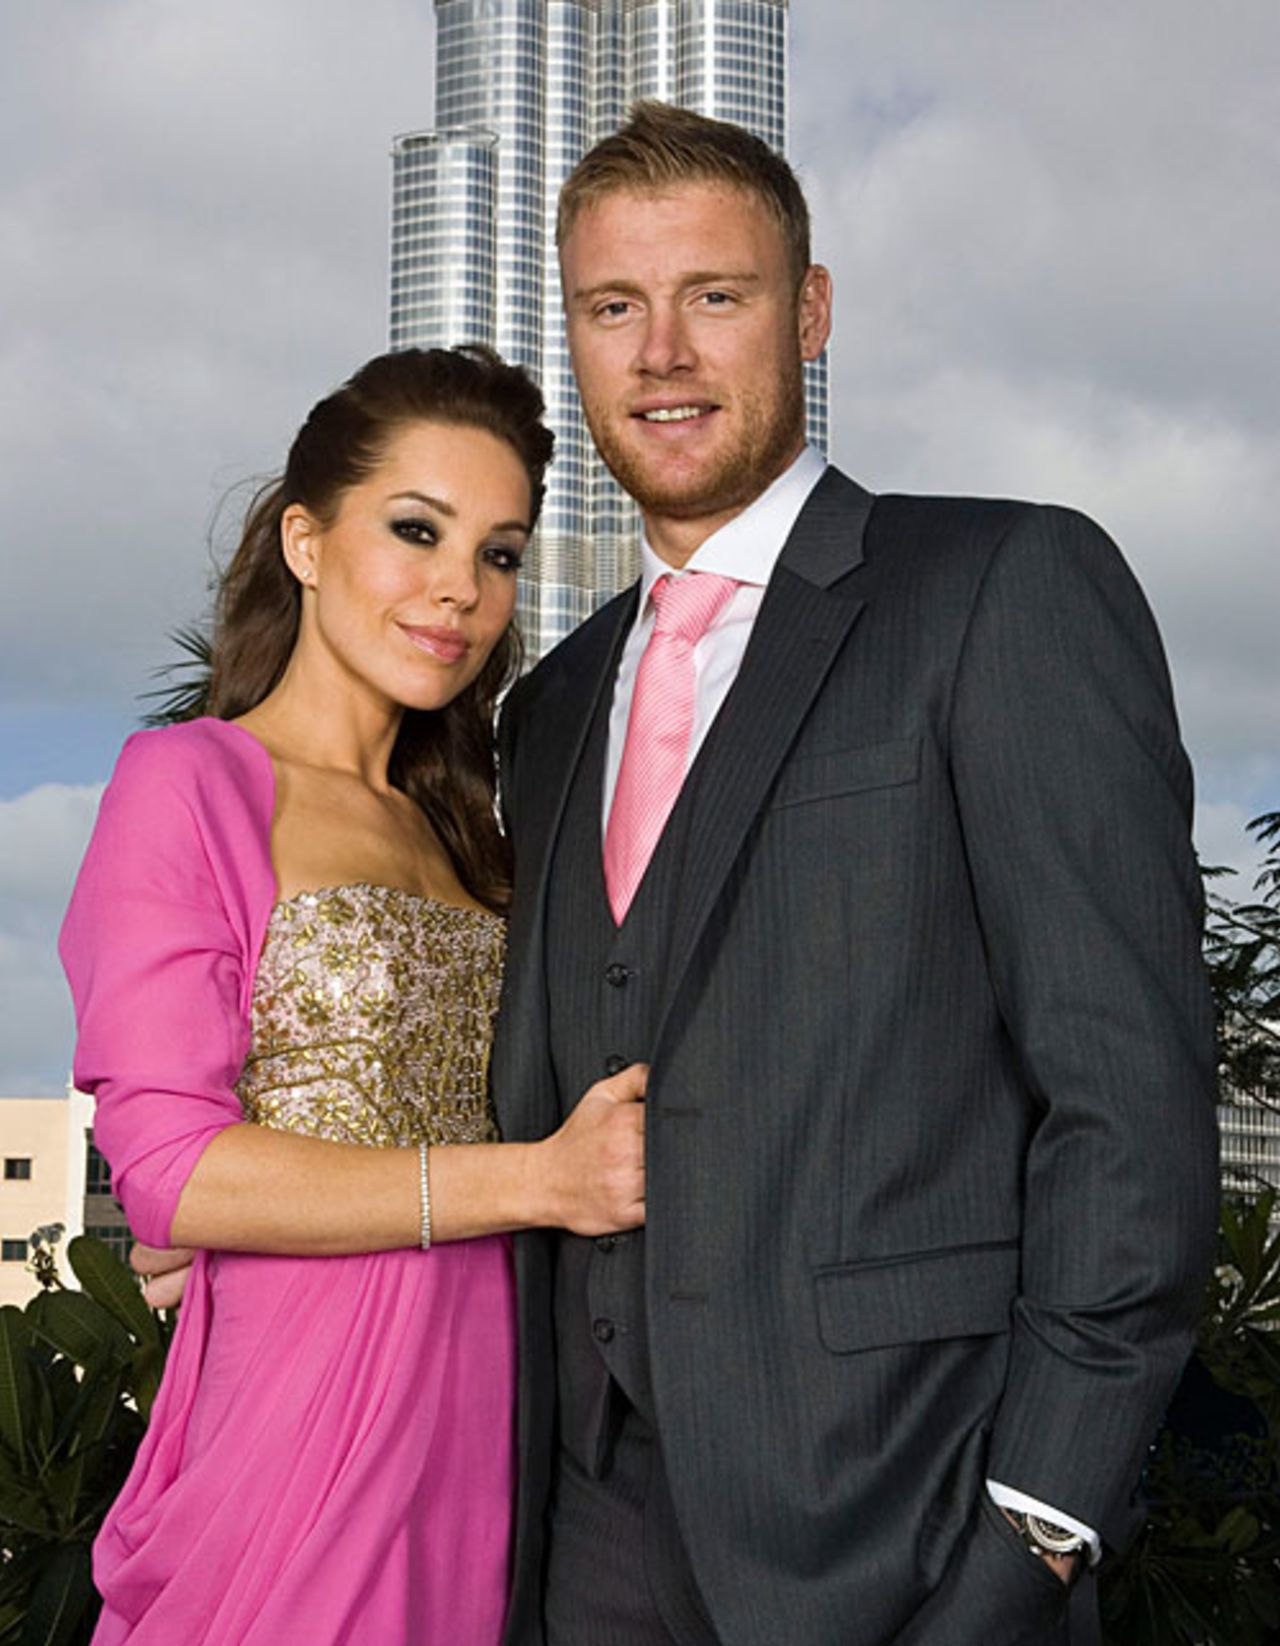 Andrew and Rachael Flintoff in front of the Burj Khalifa, the world's tallest building, January 28, 2010